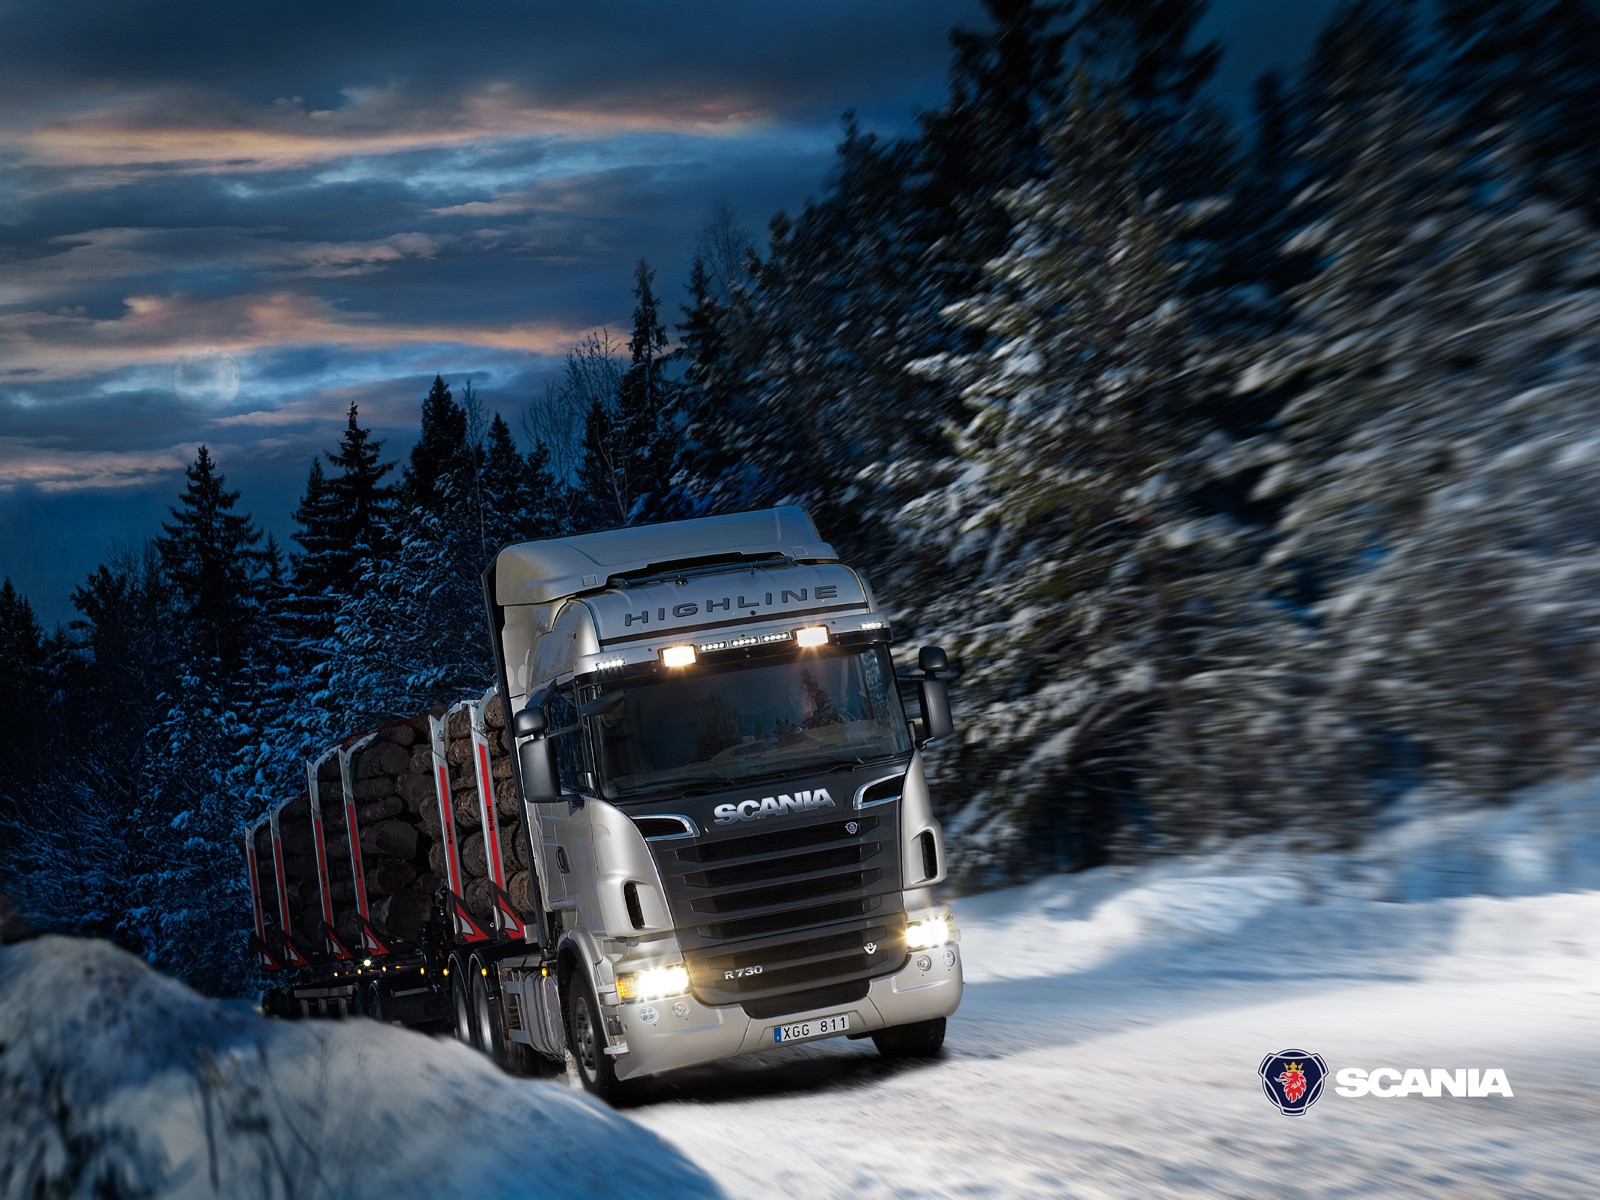 General 1600x1200 Scania numbers snow vehicle truck road motion blur silver truck (vehicle) cold outdoors Swedish trucks frontal view headlights trees sky ice clouds watermarked driving